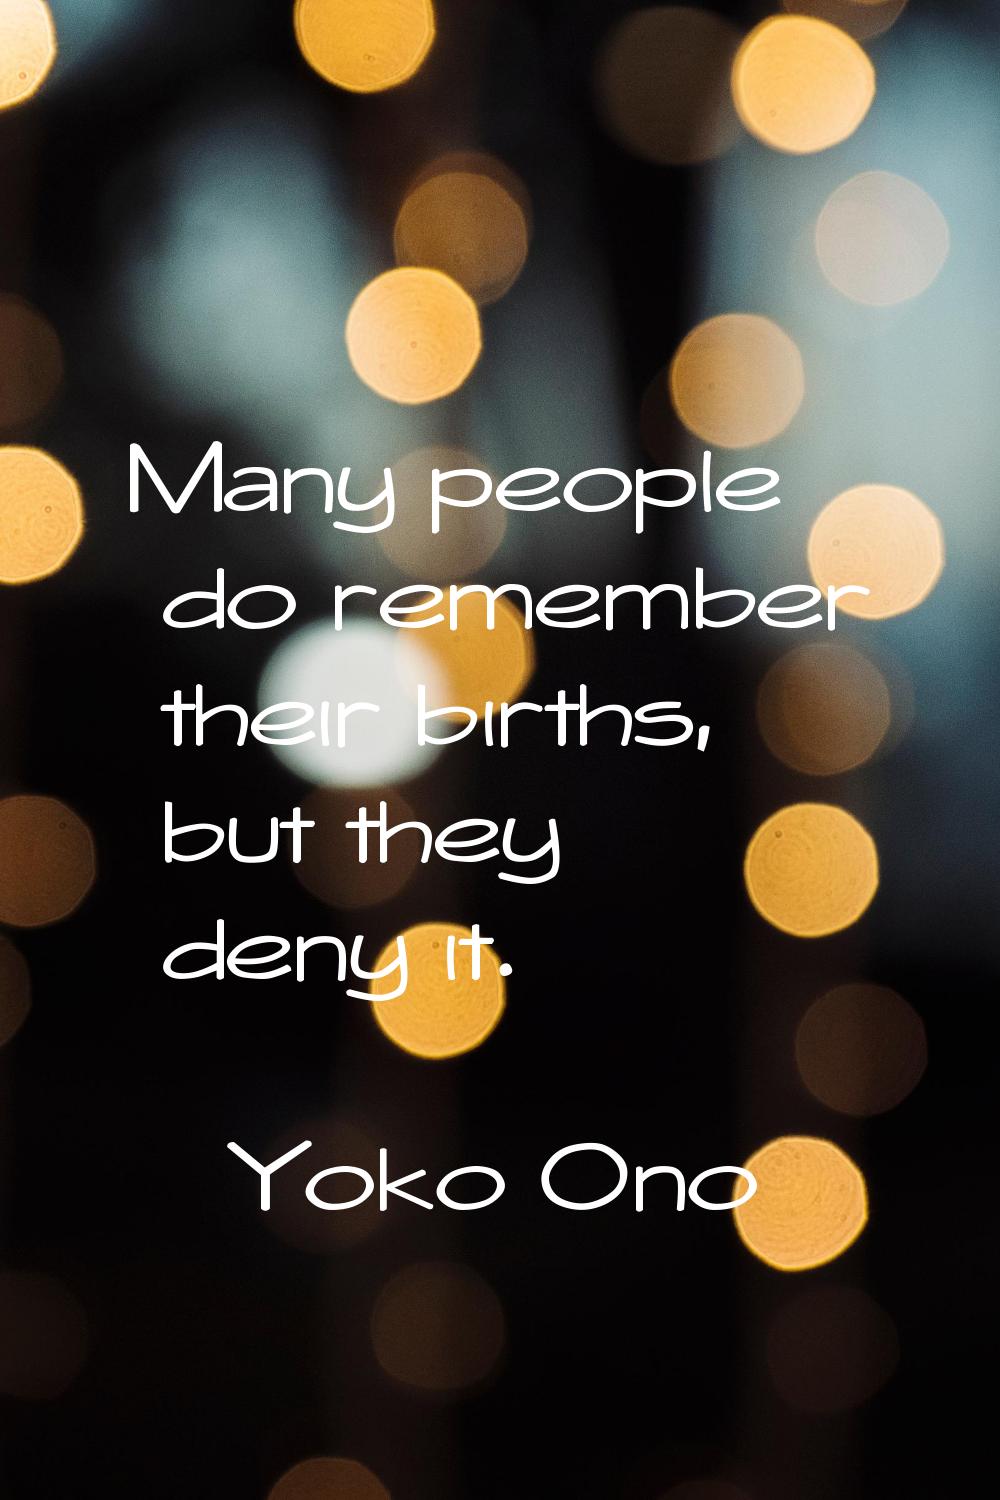 Many people do remember their births, but they deny it.